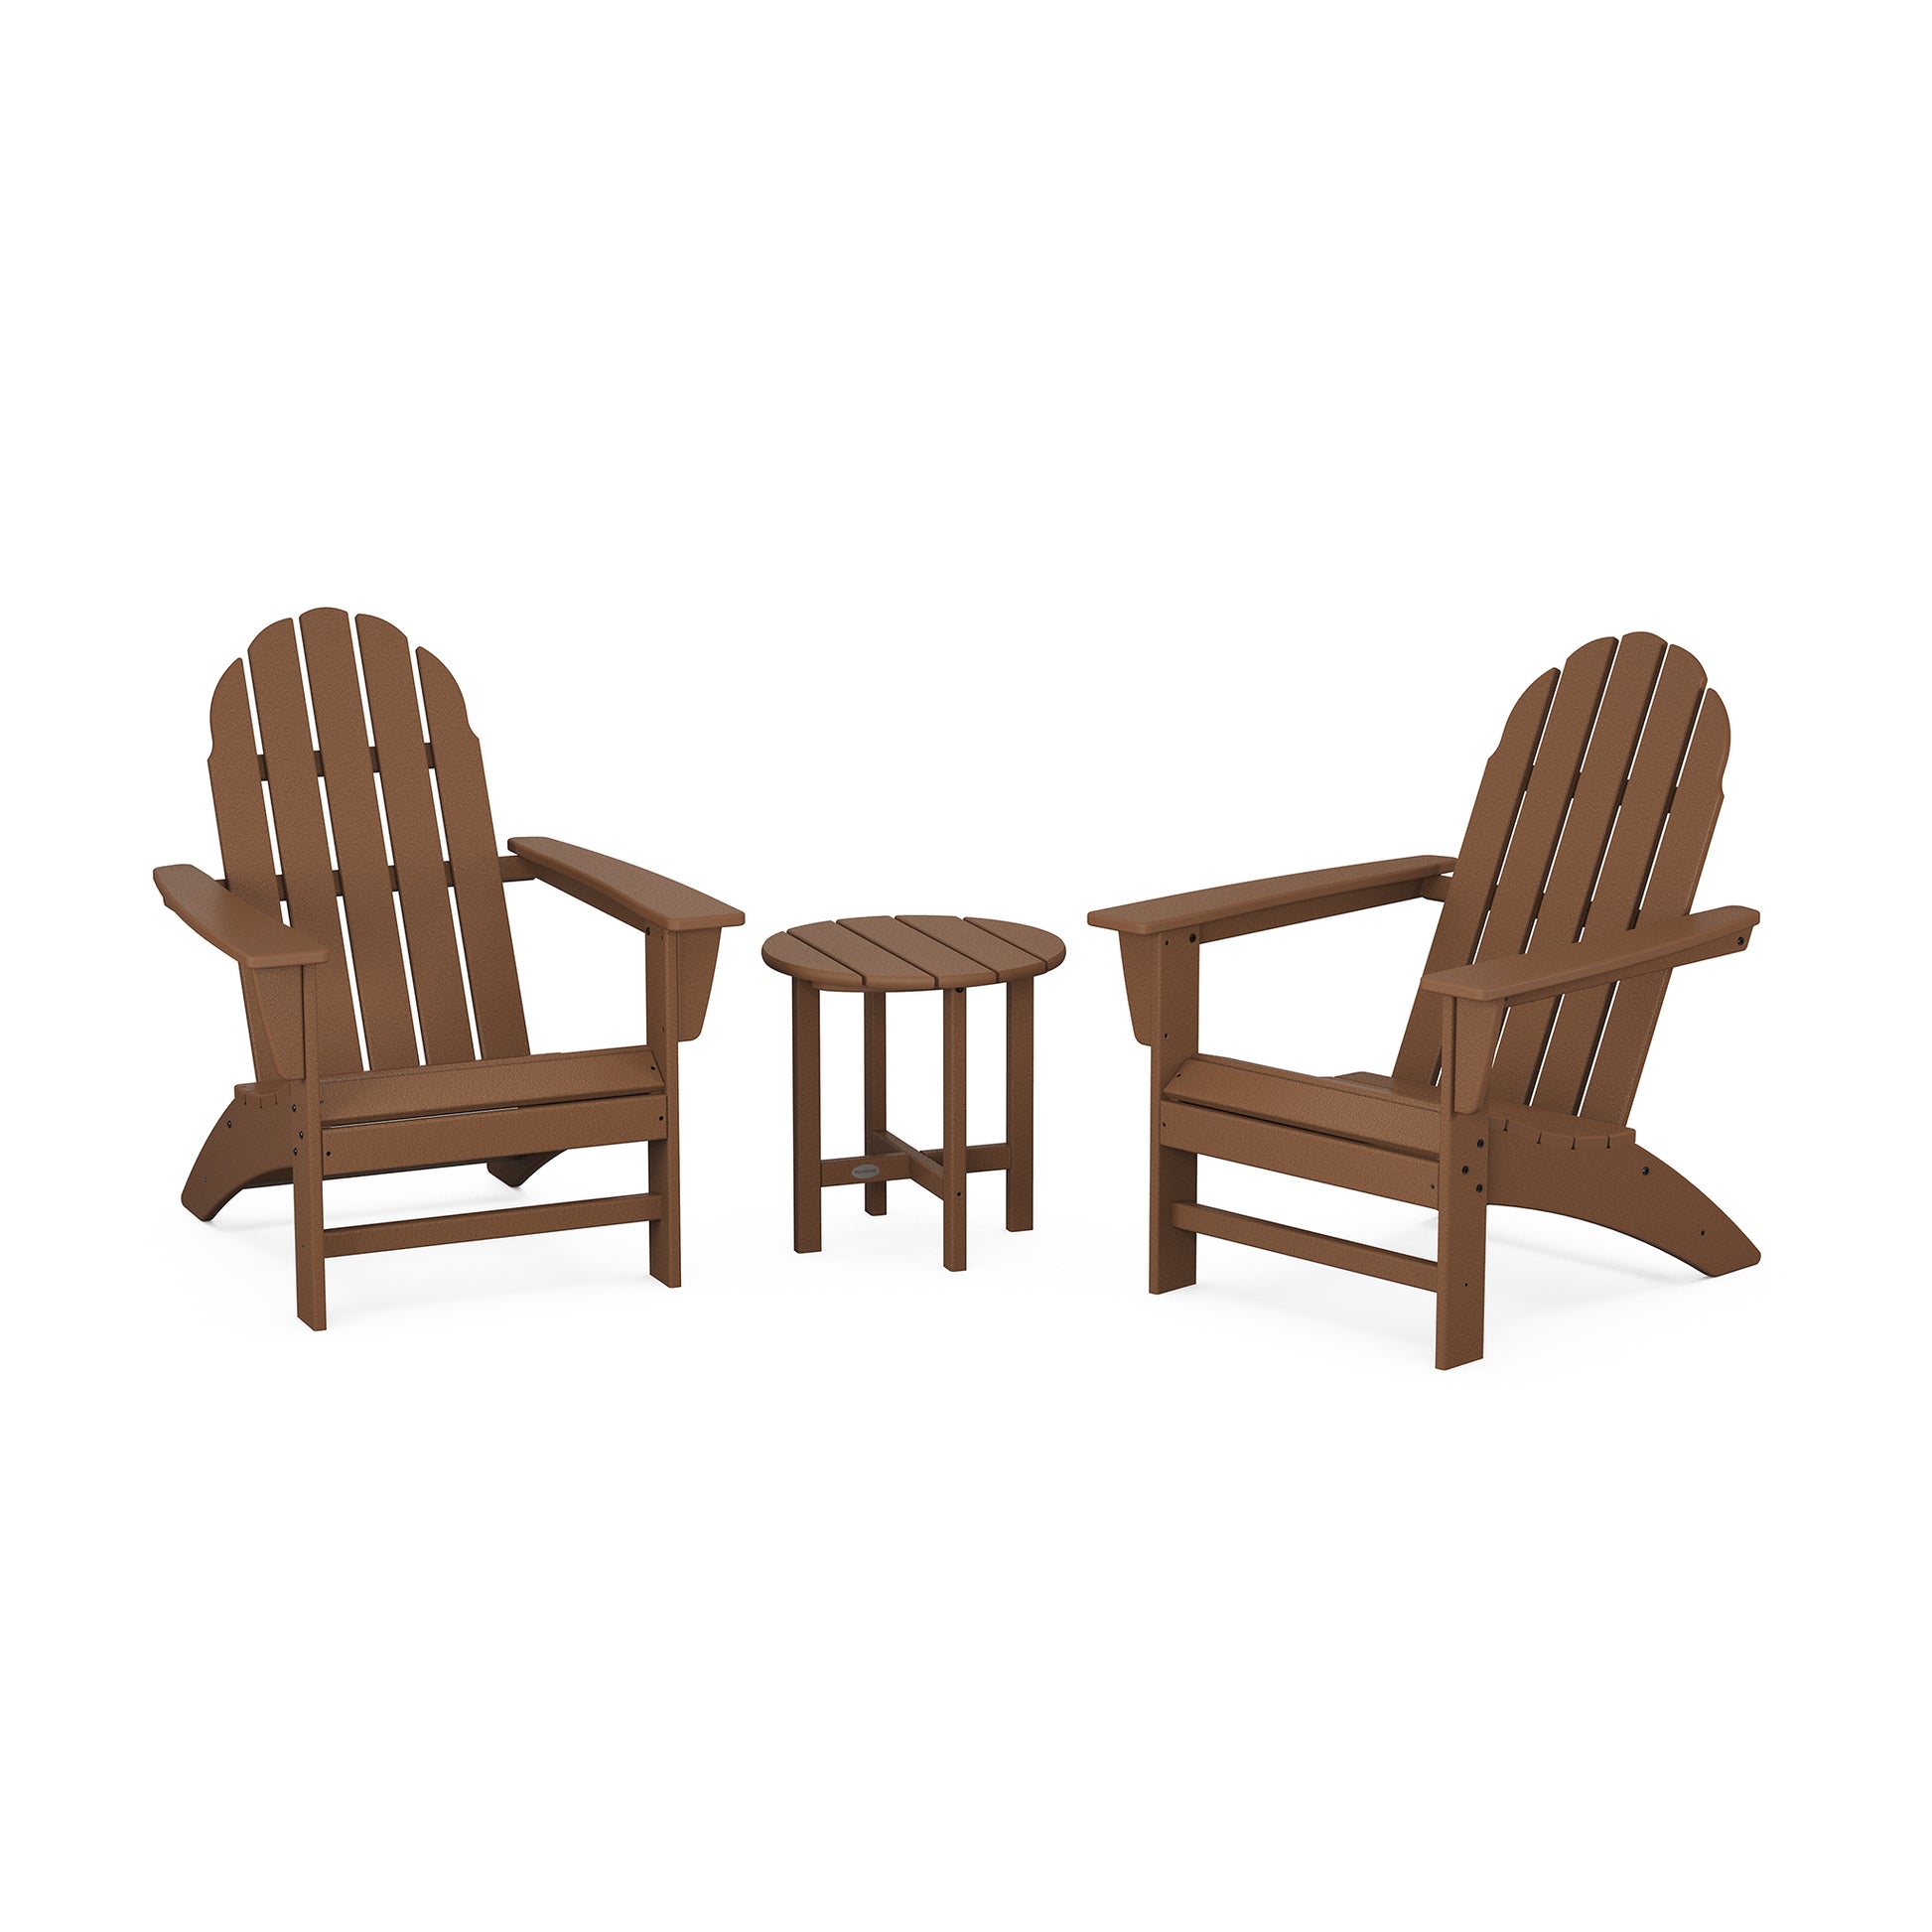 Two brown POLYWOOD Vineyard Adirondack chairs facing each other with a small round table in between, isolated on a white background.